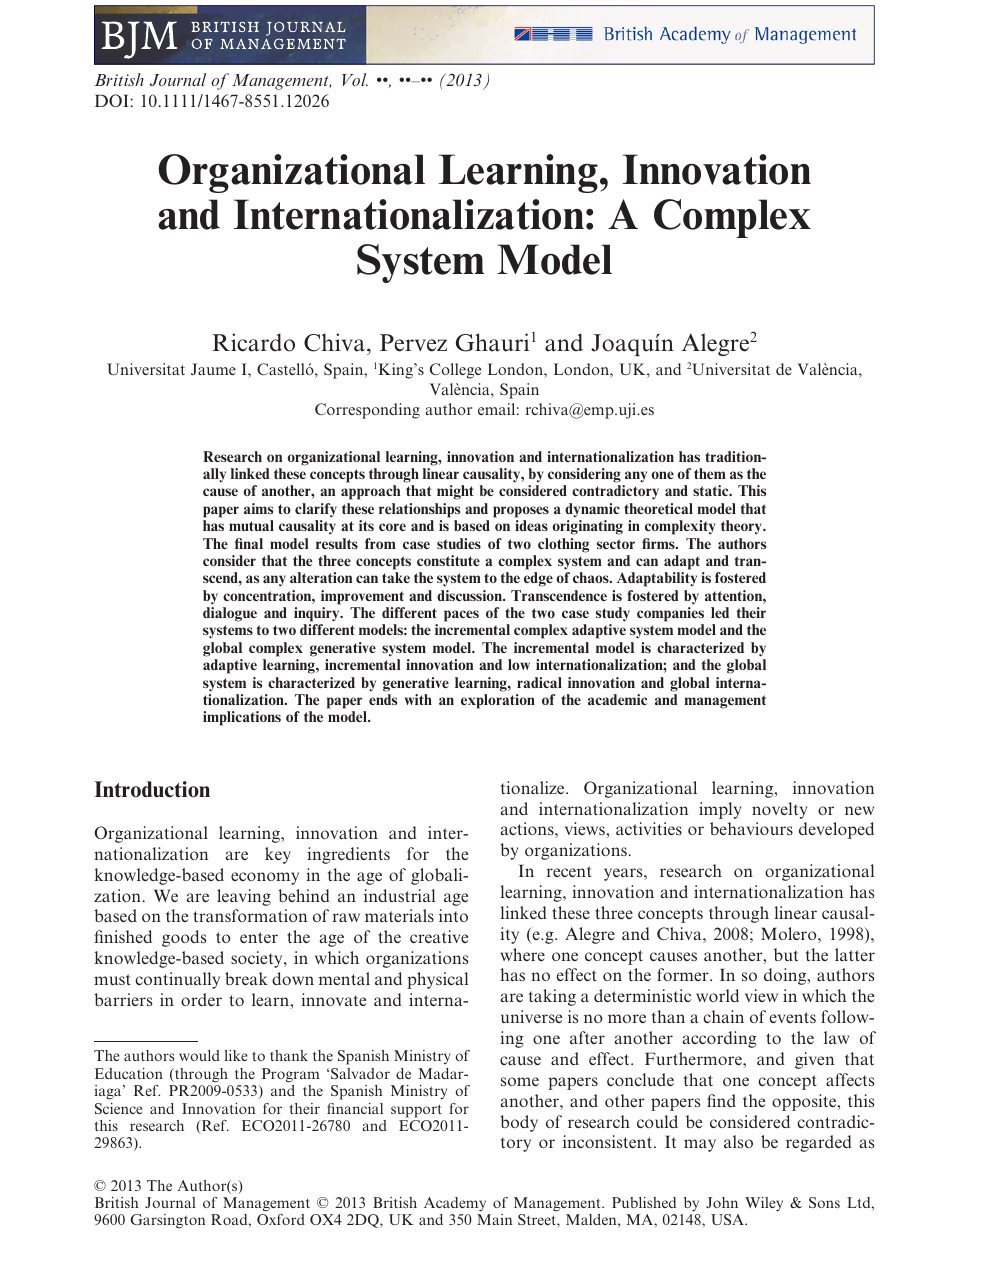 twenty in the middle of nowhere food Organizational Learning, Innovation and Internationalization: A Complex  System Model – topic of research paper in Economics and business. Download  scholarly article PDF and read for free on CyberLeninka open science hub.